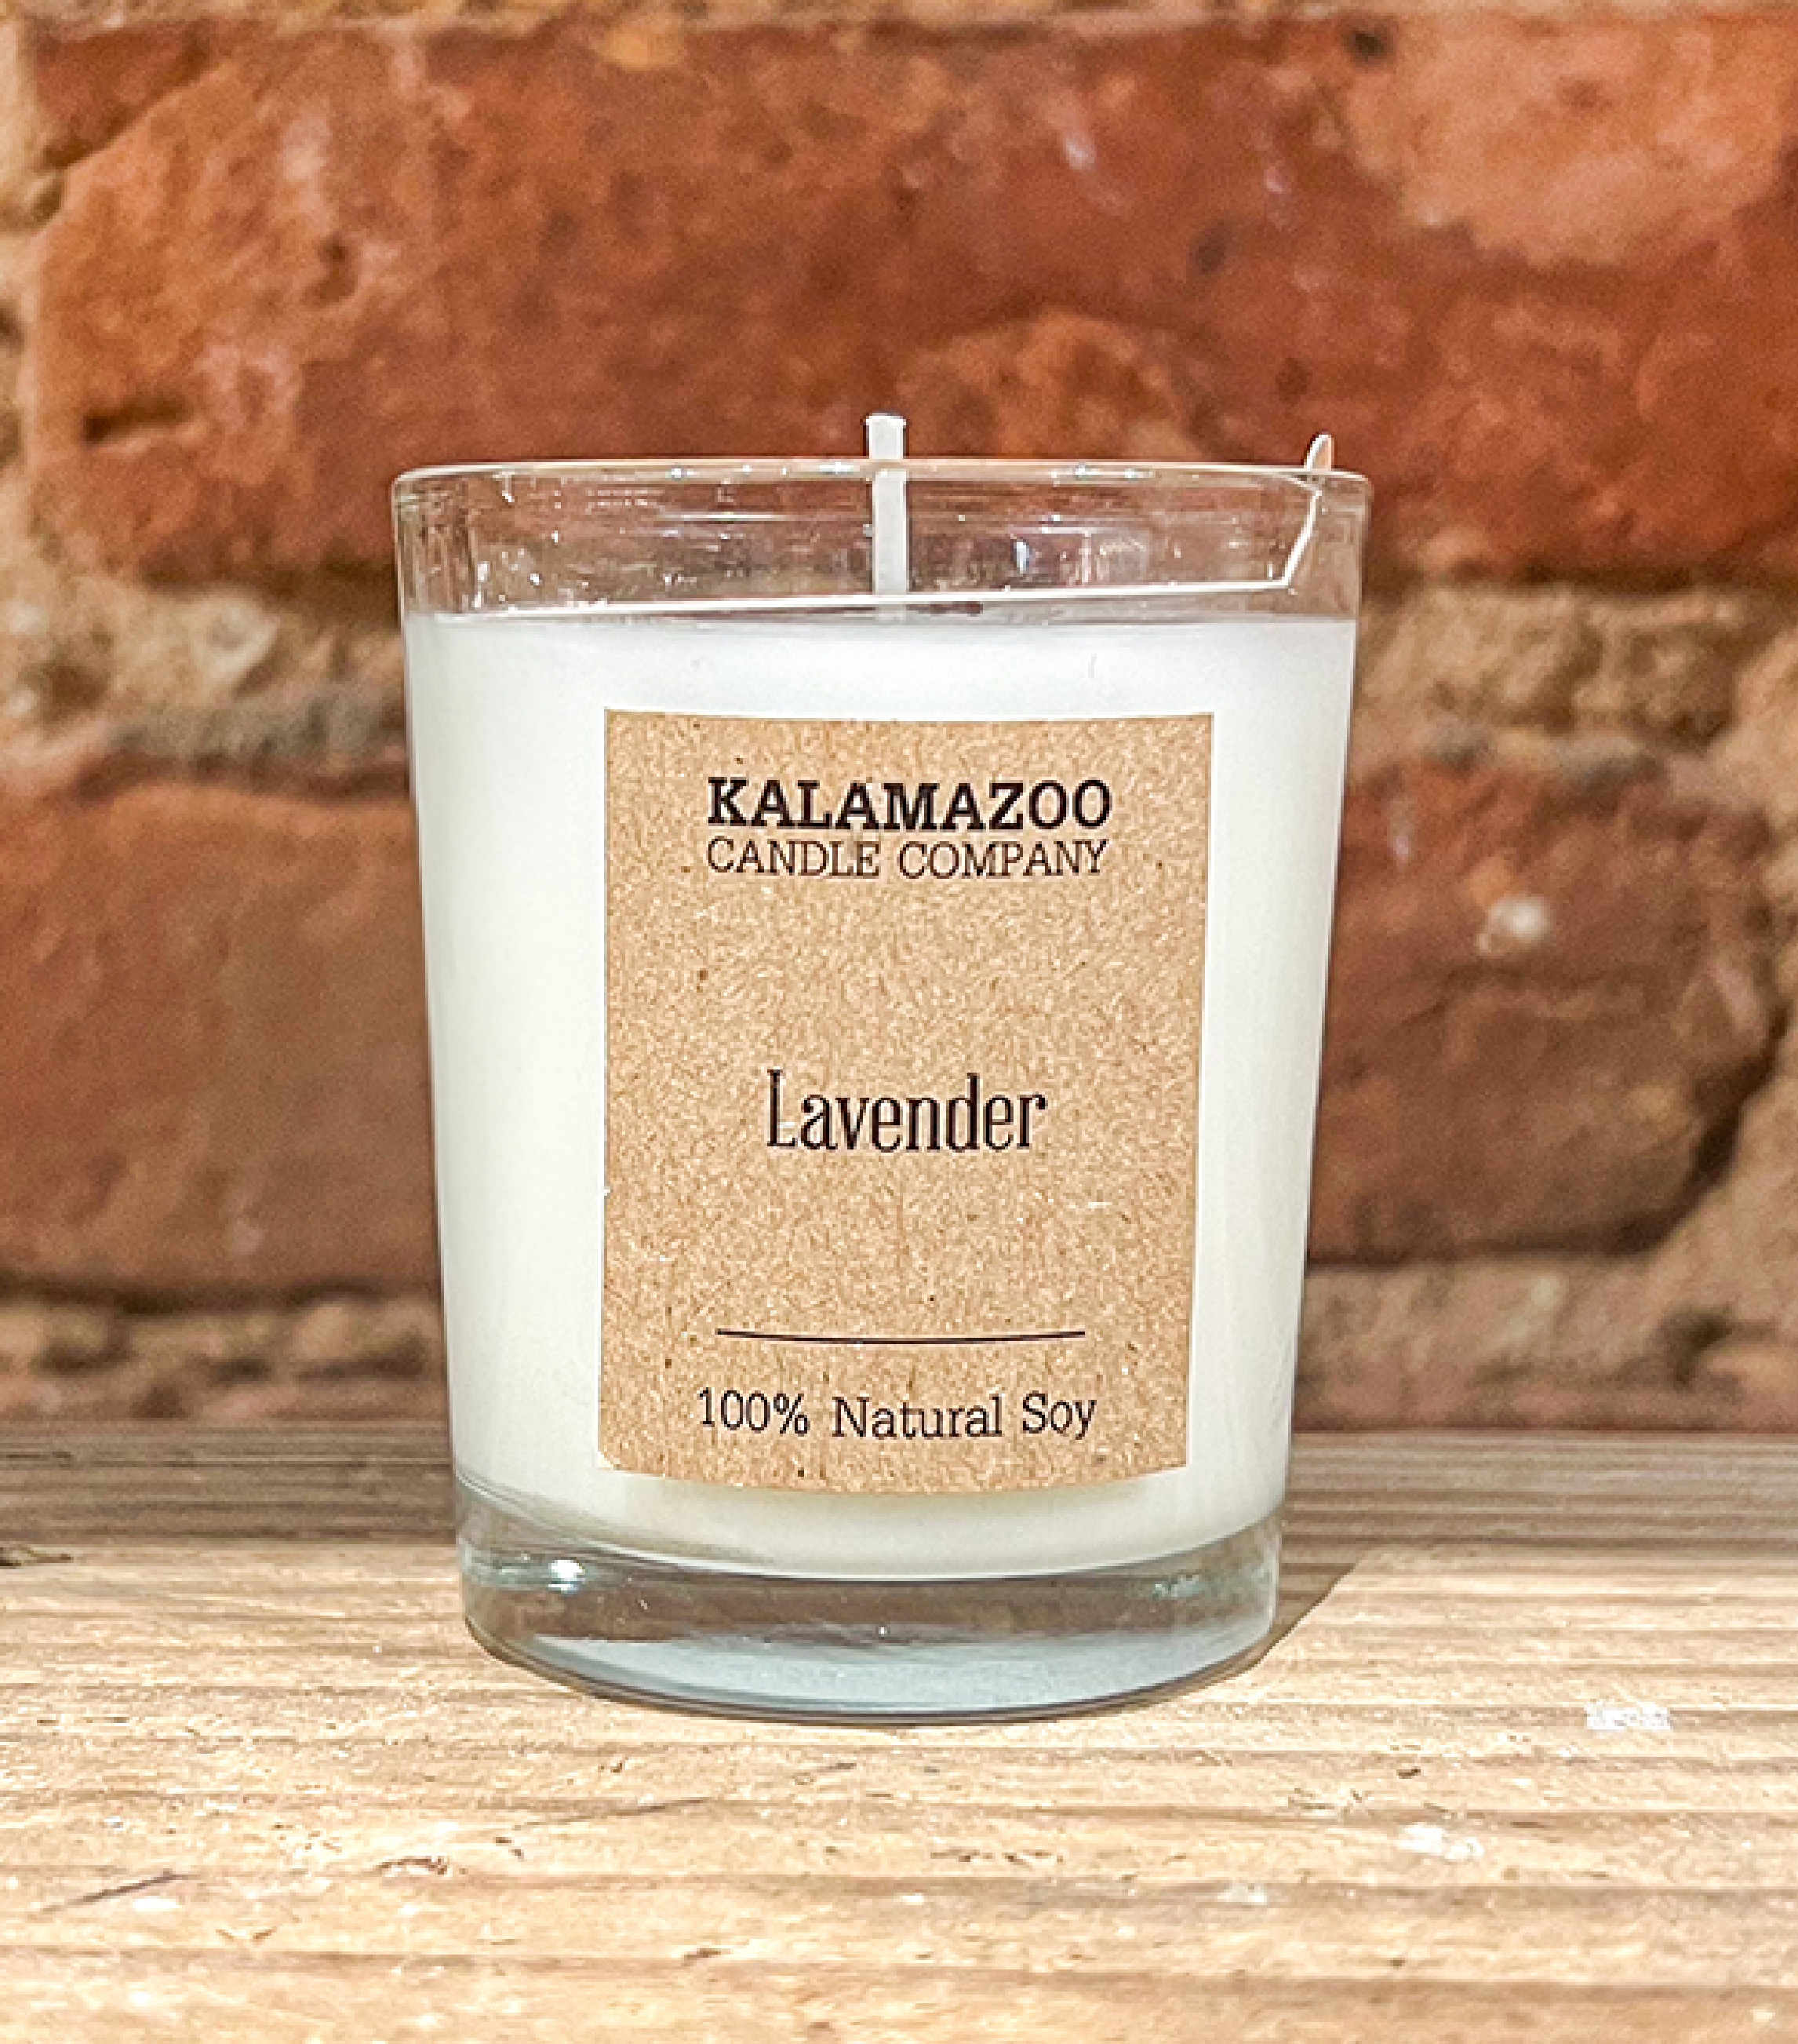 Lavender Candles Like a French countryside in bloom, this classic soy candle has notes of calming French lavender warmed by sophisticated sandalwood and pink peppercorn. All Kalamazoo Candles are: 100% natural scented soy wax; produced using locally sourc